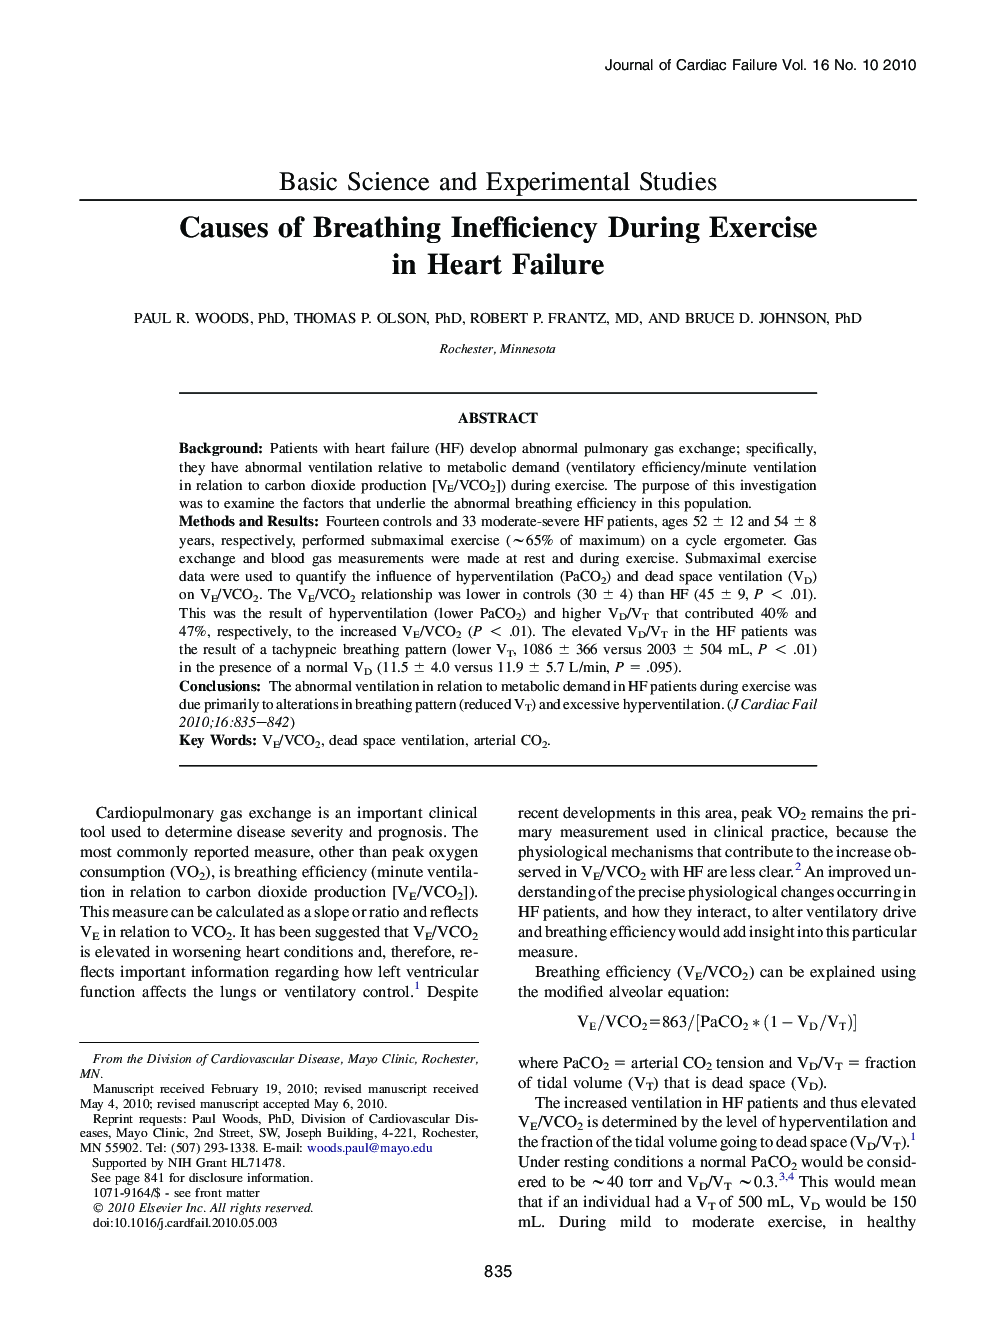 Causes of Breathing Inefficiency During Exercise in Heart Failure 